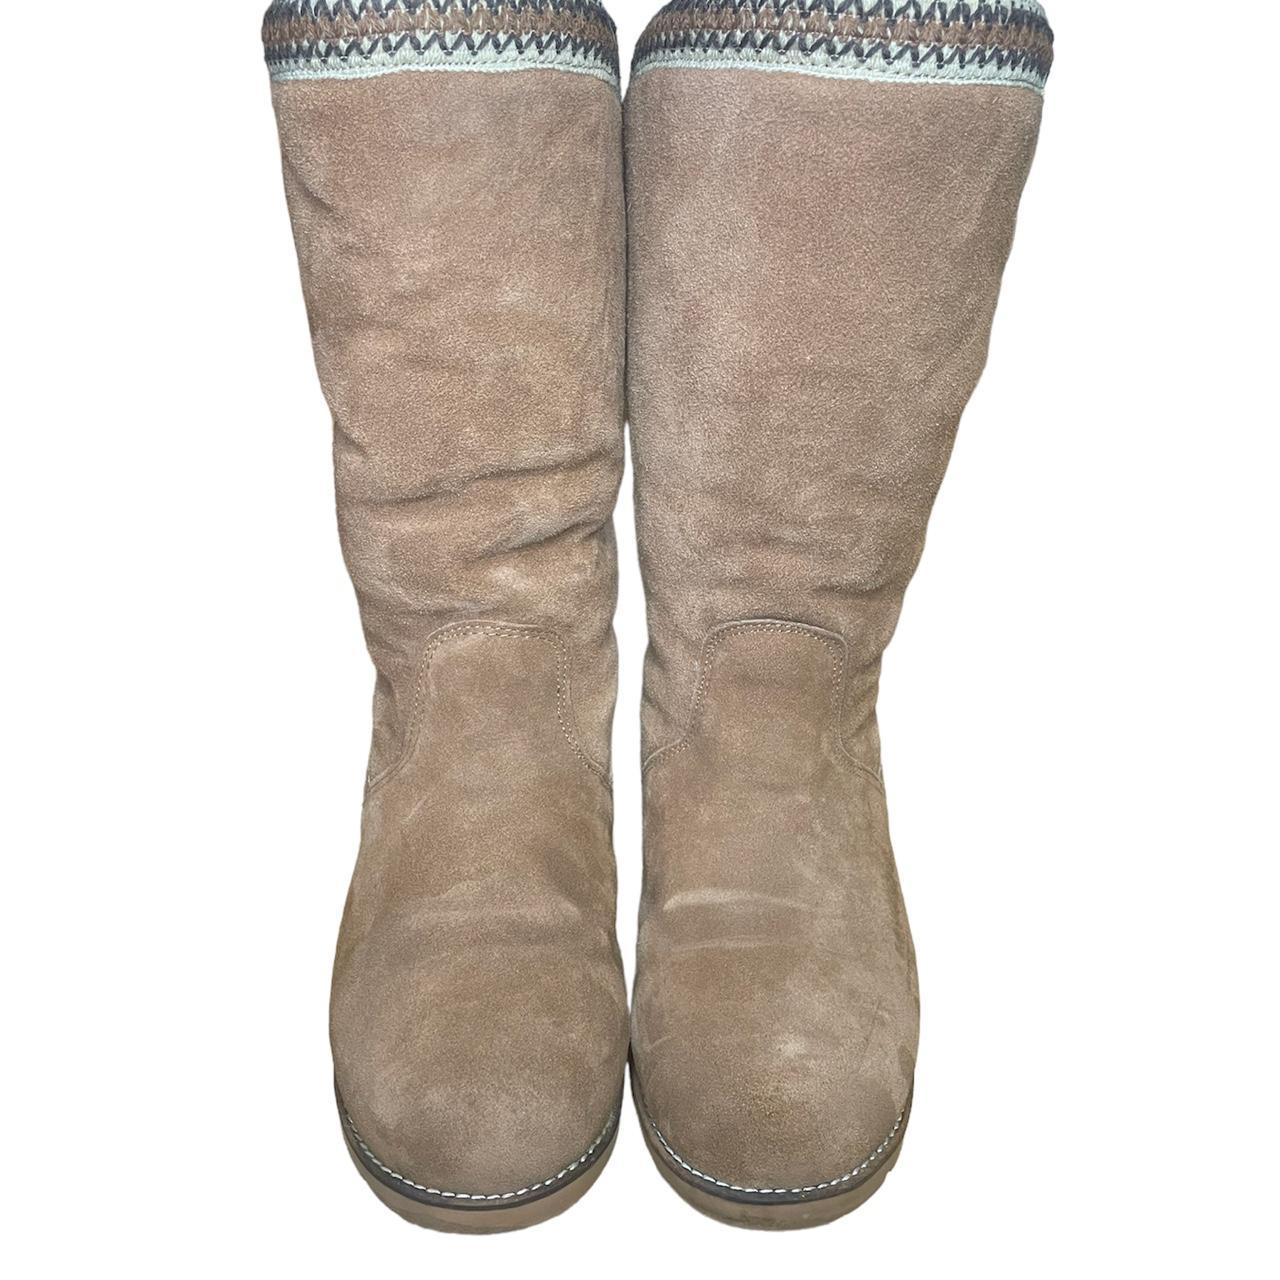 Lamo Women's Brown and White Boots